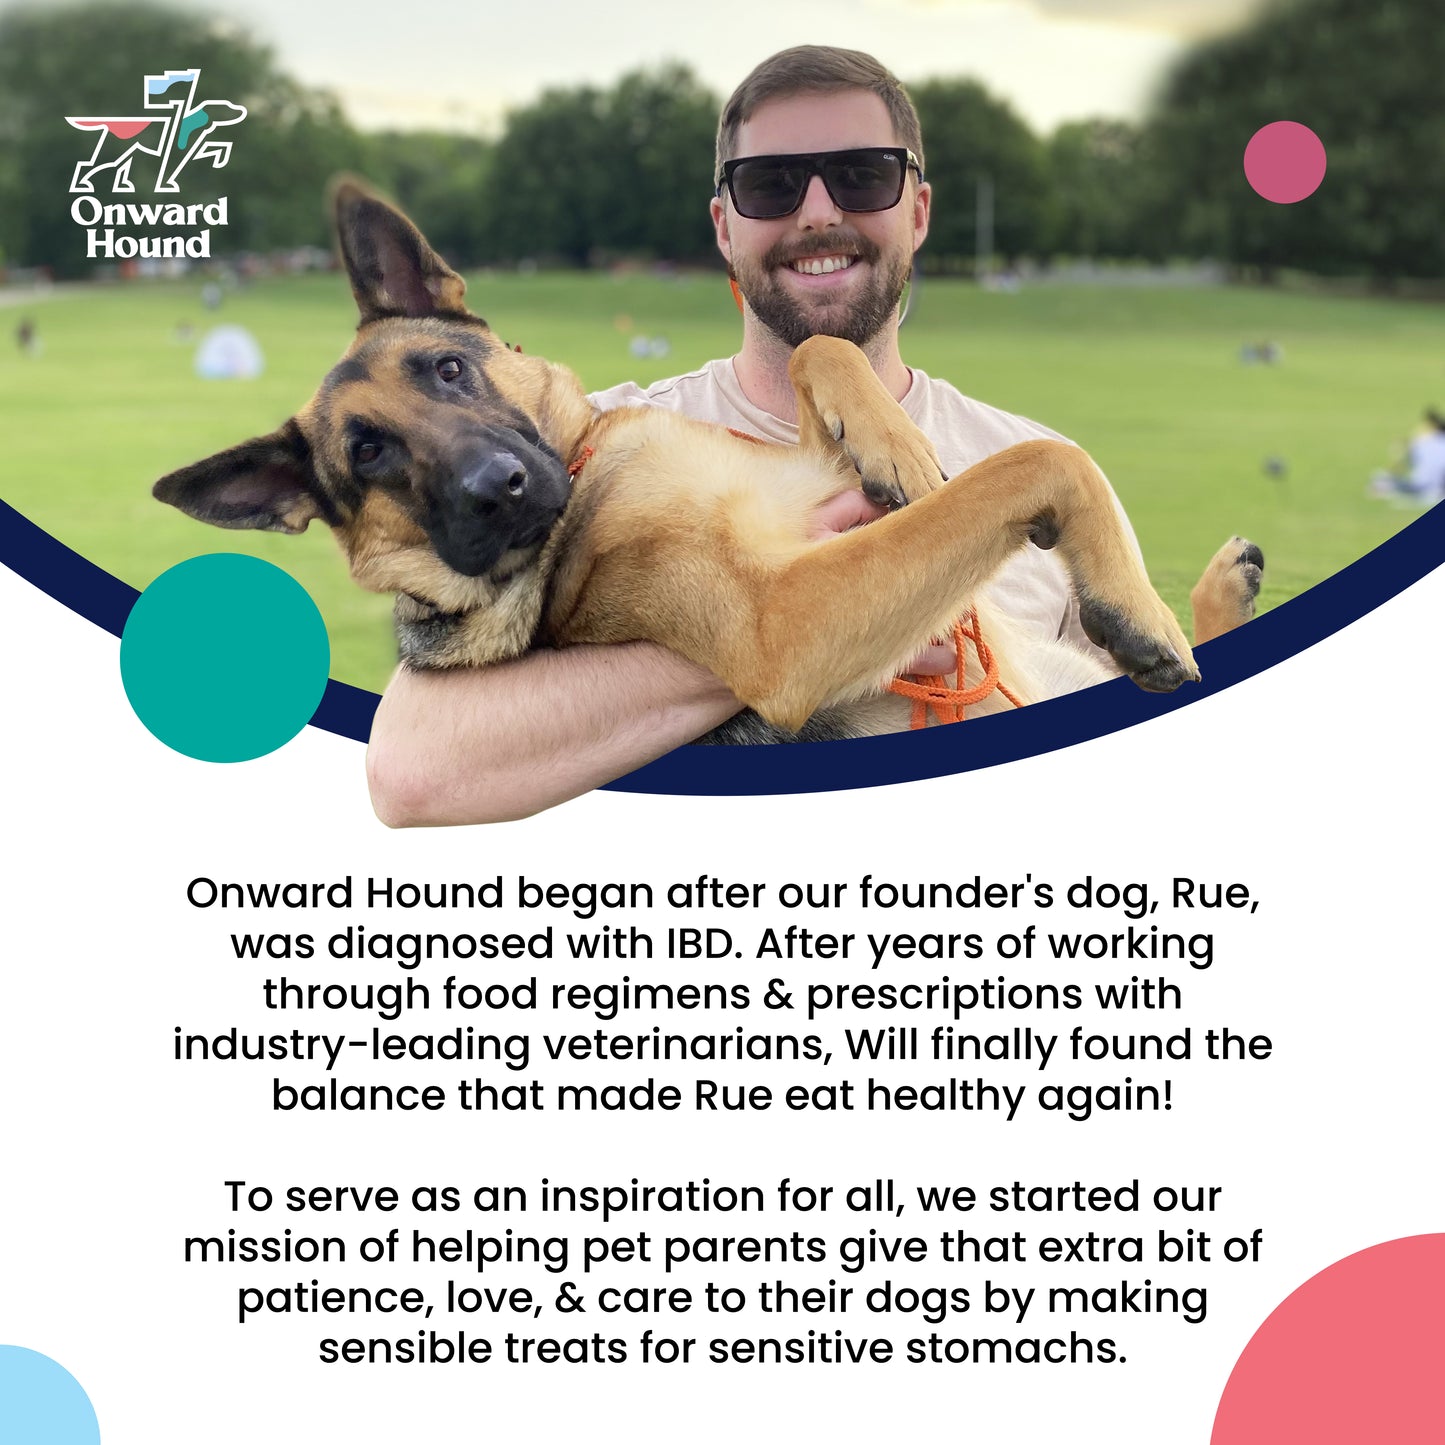 Onward Hound Belly Benefits | Training Treats for Sensitive Stomachs